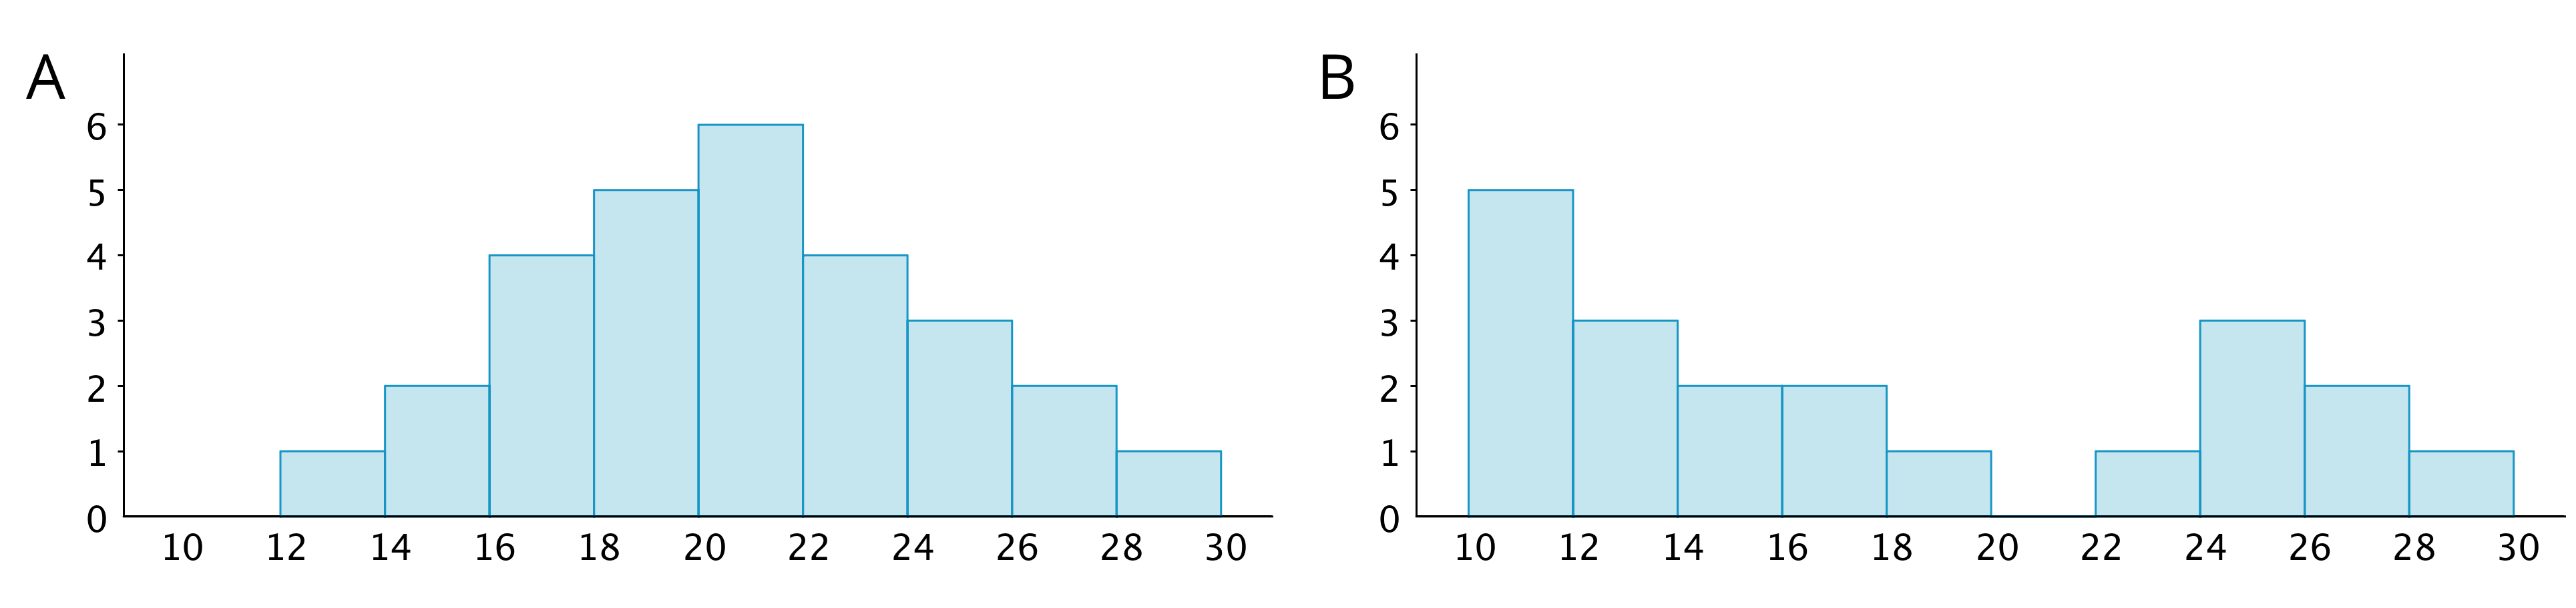 Two histograms, labeled “A” and “B” where the horizontal axis has the numbers 10 through 30, in increments of 2, indicated and on the vertical axis, the numbers 0 through 6 are indicated. The data represented by the bars on histogram “A” are: 10 up to 12, 0; 12 up to 14, 1; 14 up to 16, 2, 16 up to 18, 4; 18 up to 20, 5; 20 up to 22, 6; 22 up to 24, 4, 24 up to 26, 3; 26 up to 28, 2; 28 up to 30, 1. The data represented by the bars on histogram “B” are: 10 up to 12, 5; 12 up to 14, 3; 14 up to 16, 2; 16 up to 18, 2; 18 up to 20, 1; 20 up to 22, 0; 22 up to 24, 1; 24 up to 26, 3; 26 up to 28, 2; 28 up to 30, 1.